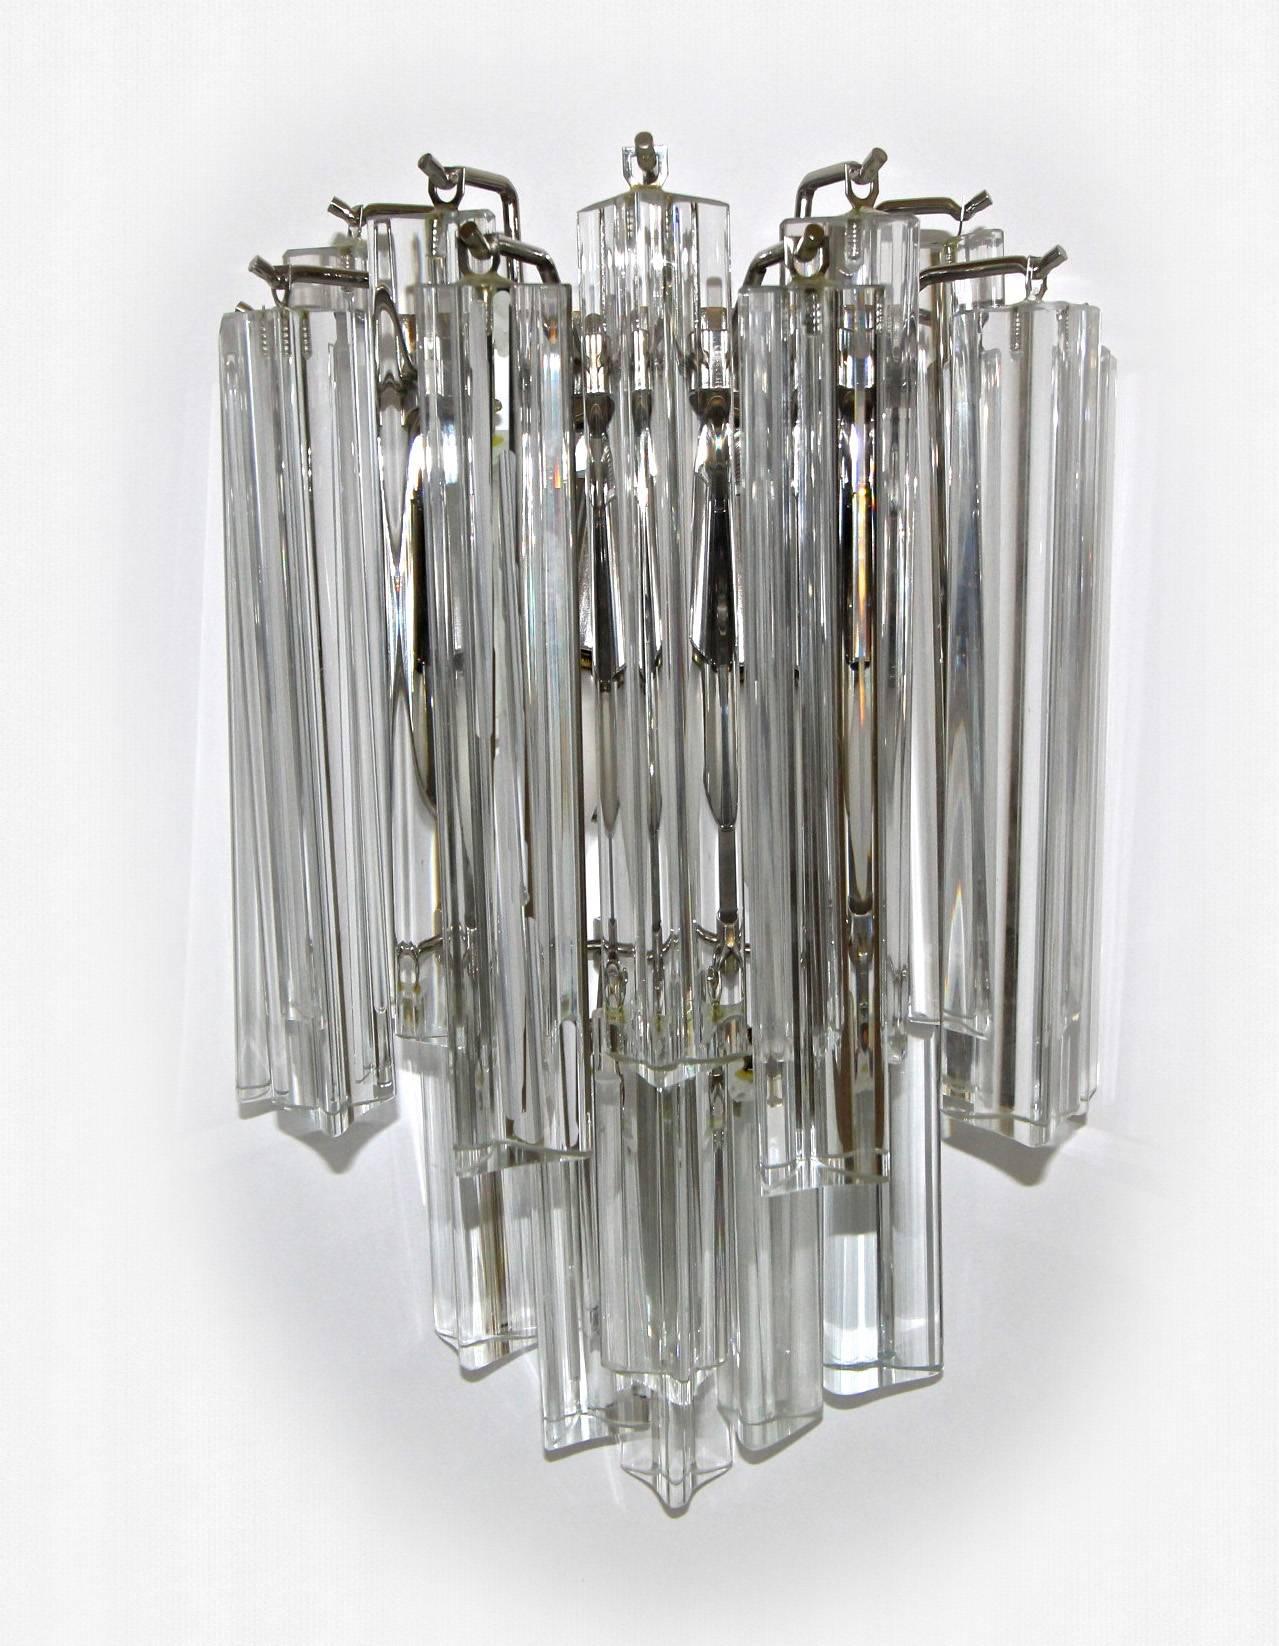 Pair of Venini Italian Triedri Glass Wall Sconces In Excellent Condition For Sale In Palm Springs, CA